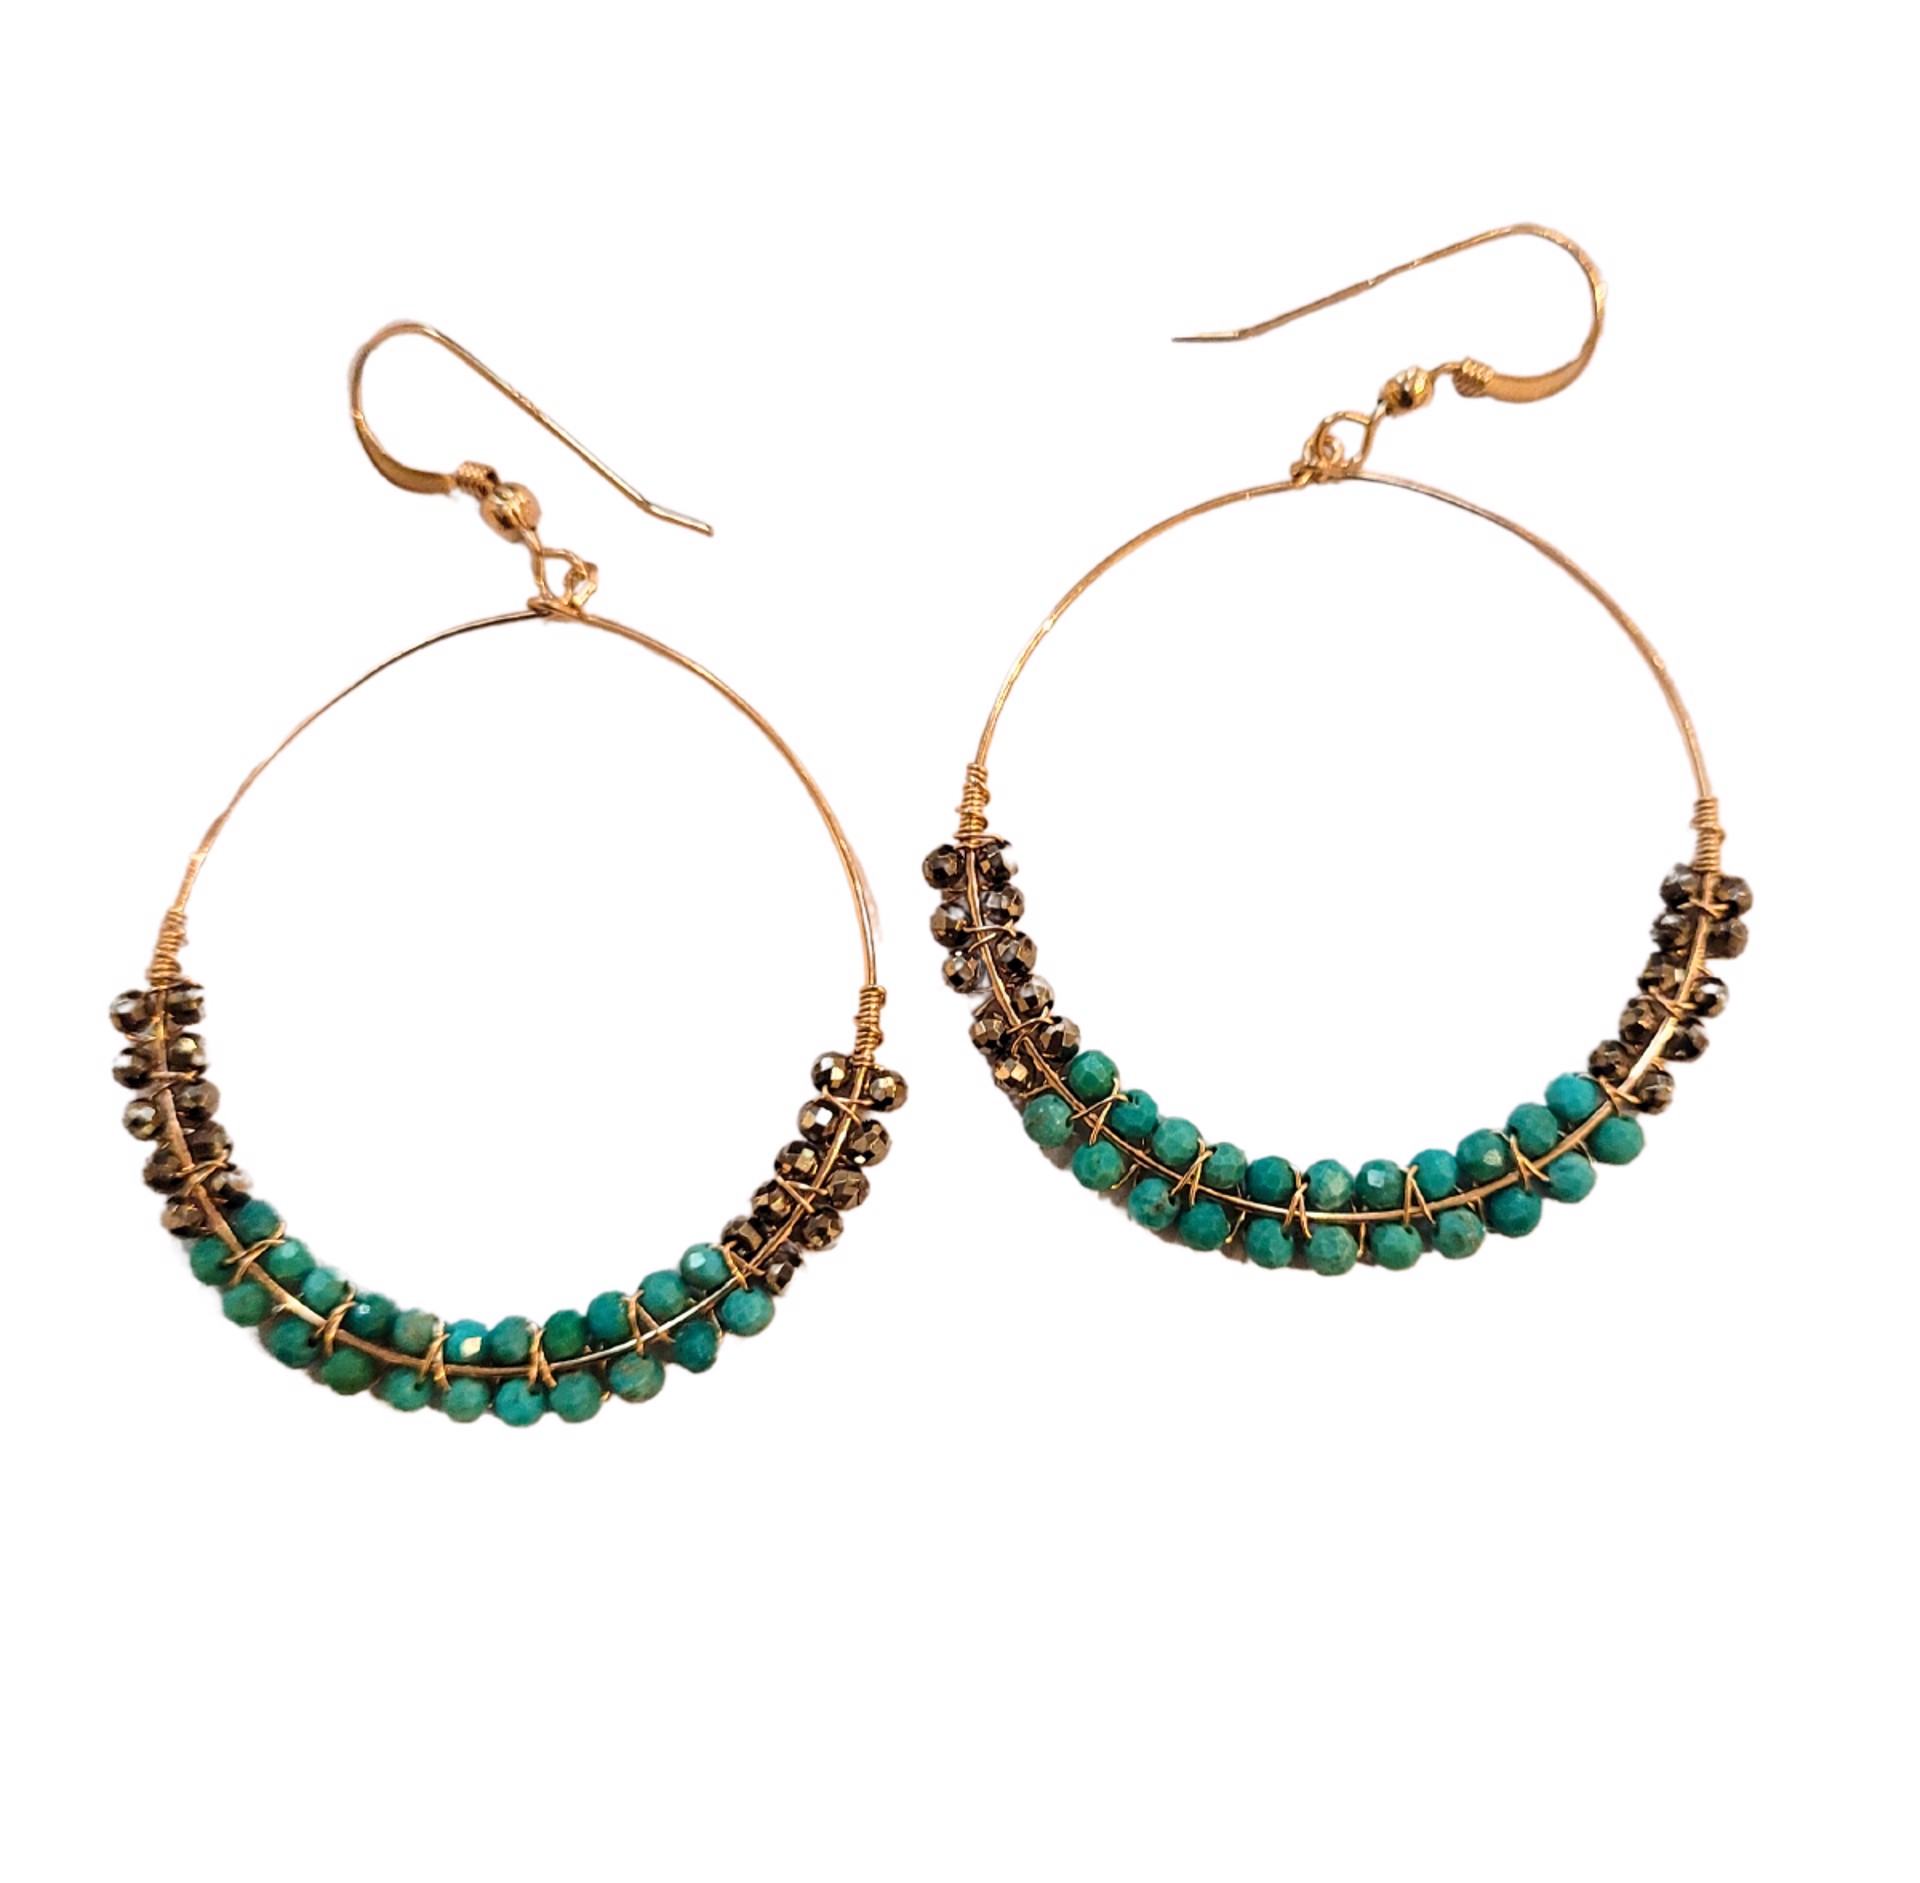 Earrings - Turquoise and Pyrite Hoops by Julia Balestracci